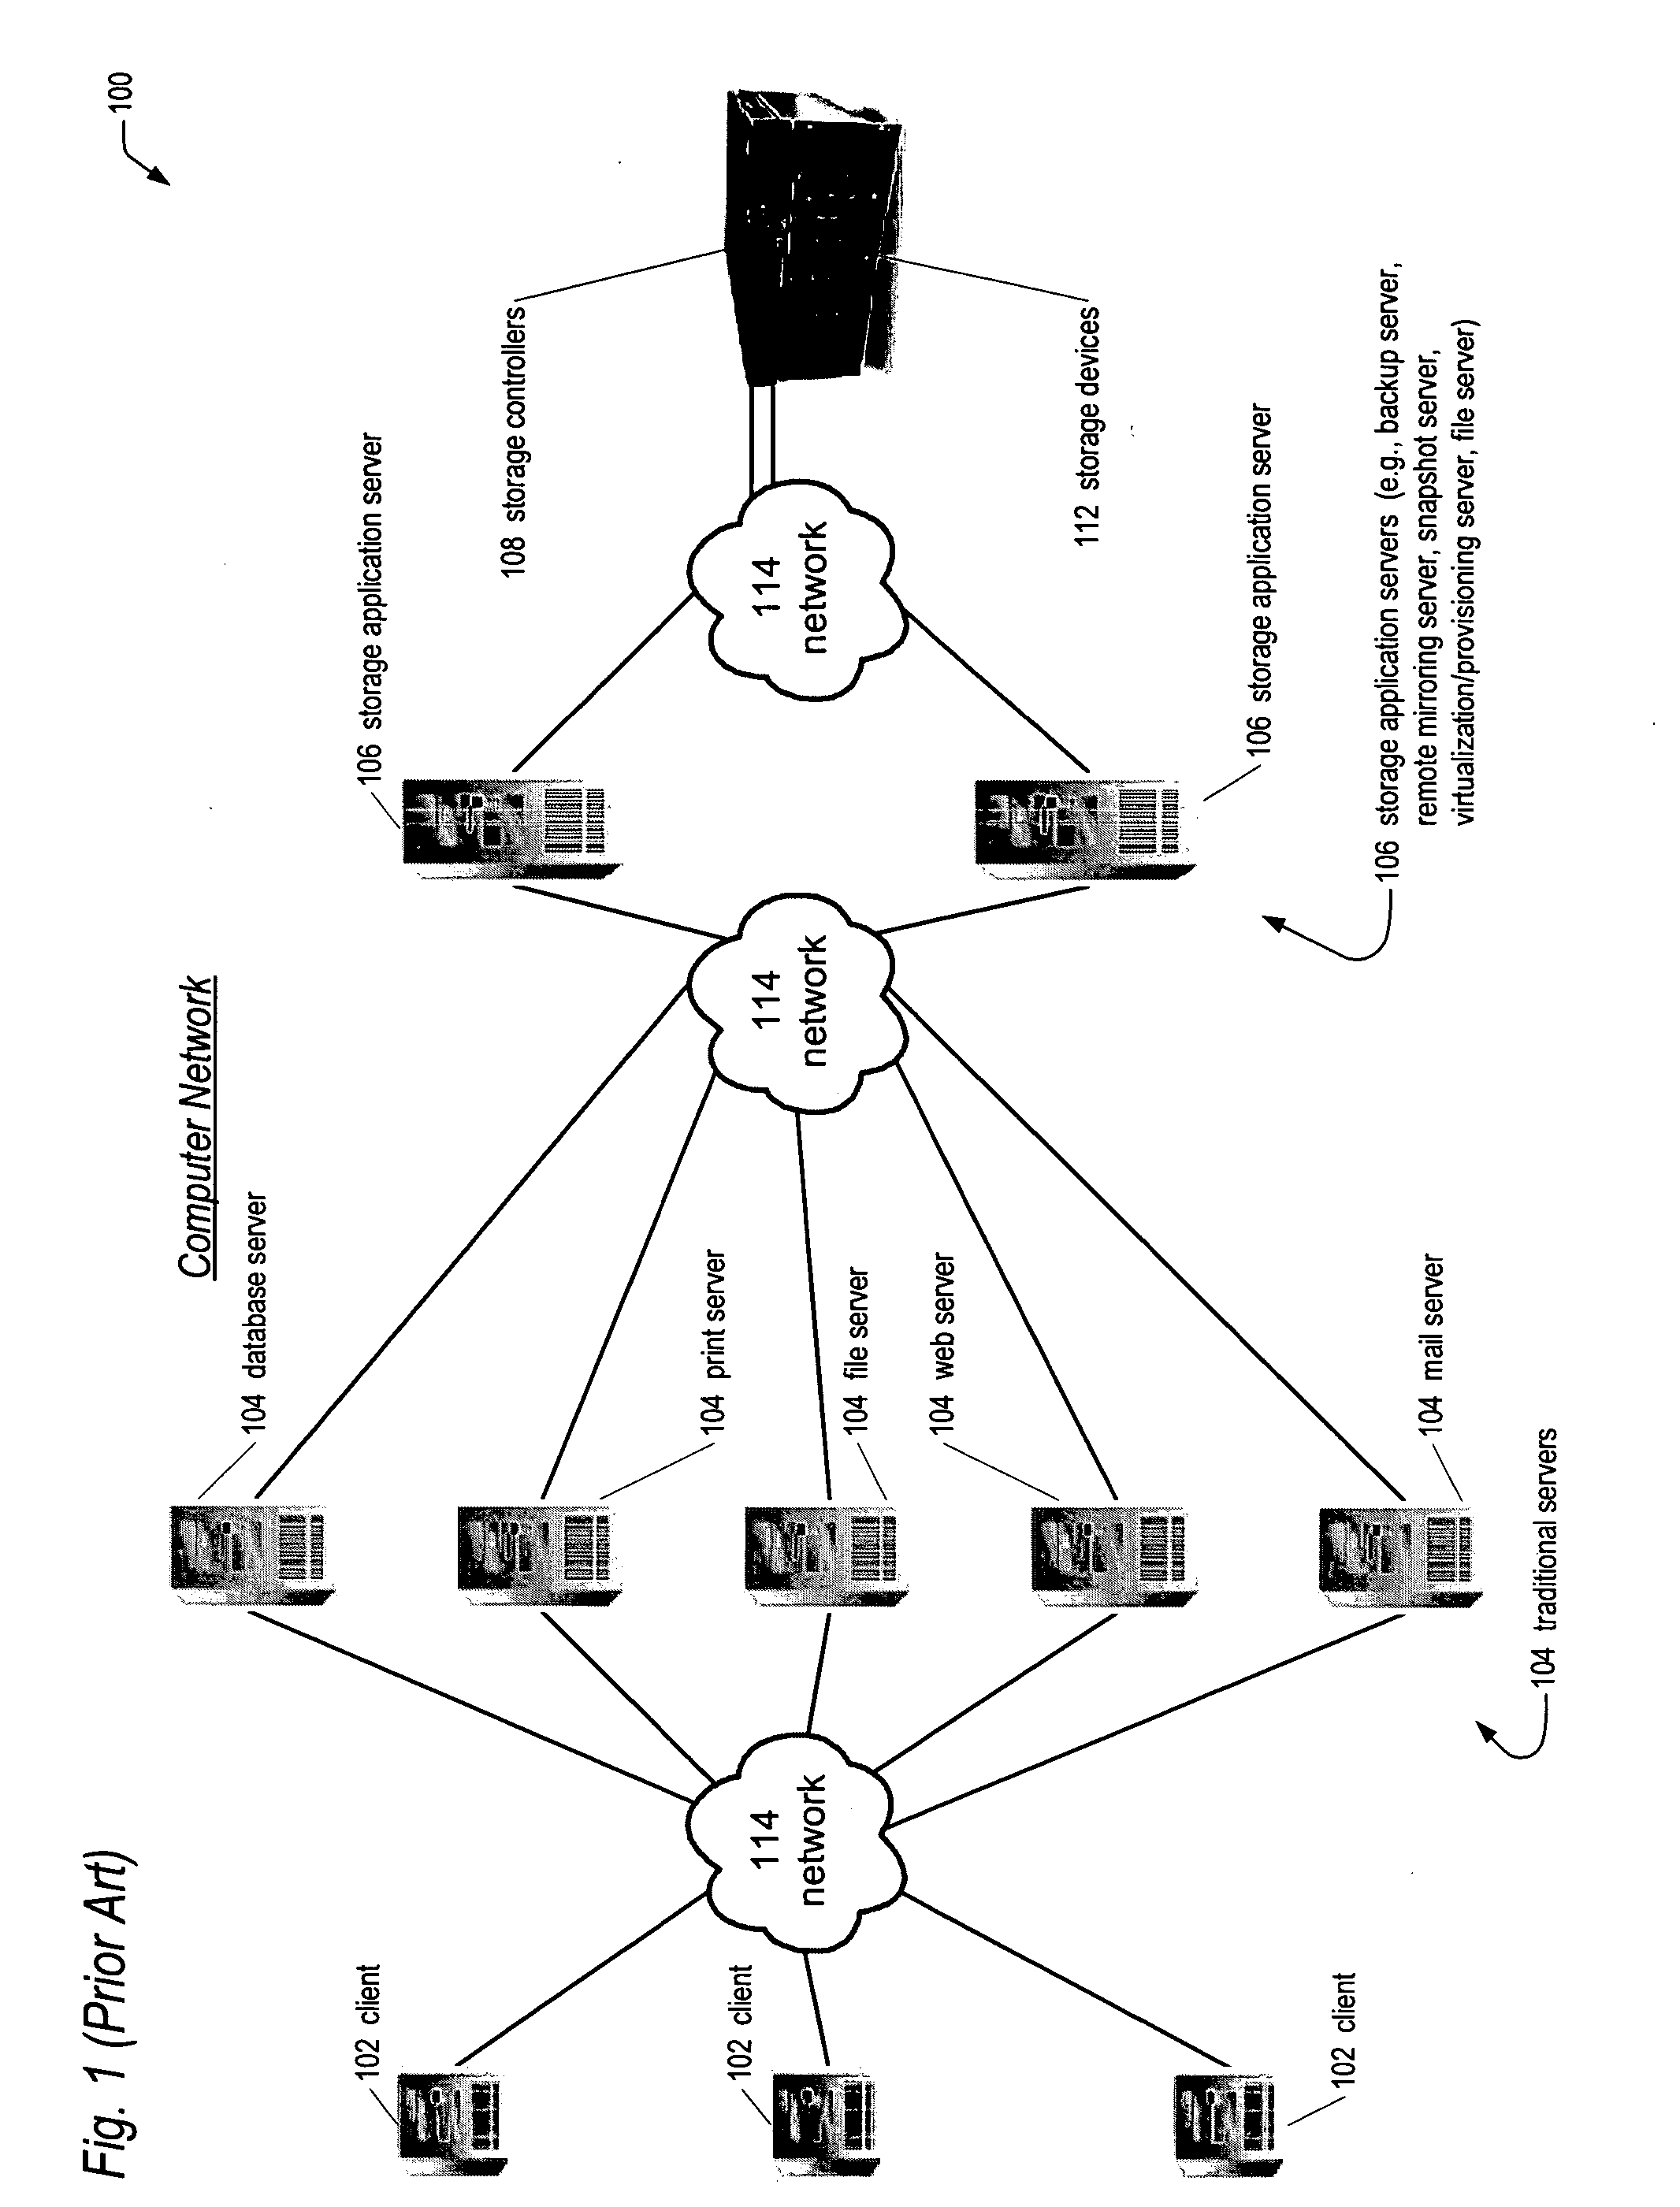 Network storage appliance with integrated redundant servers and storage controllers